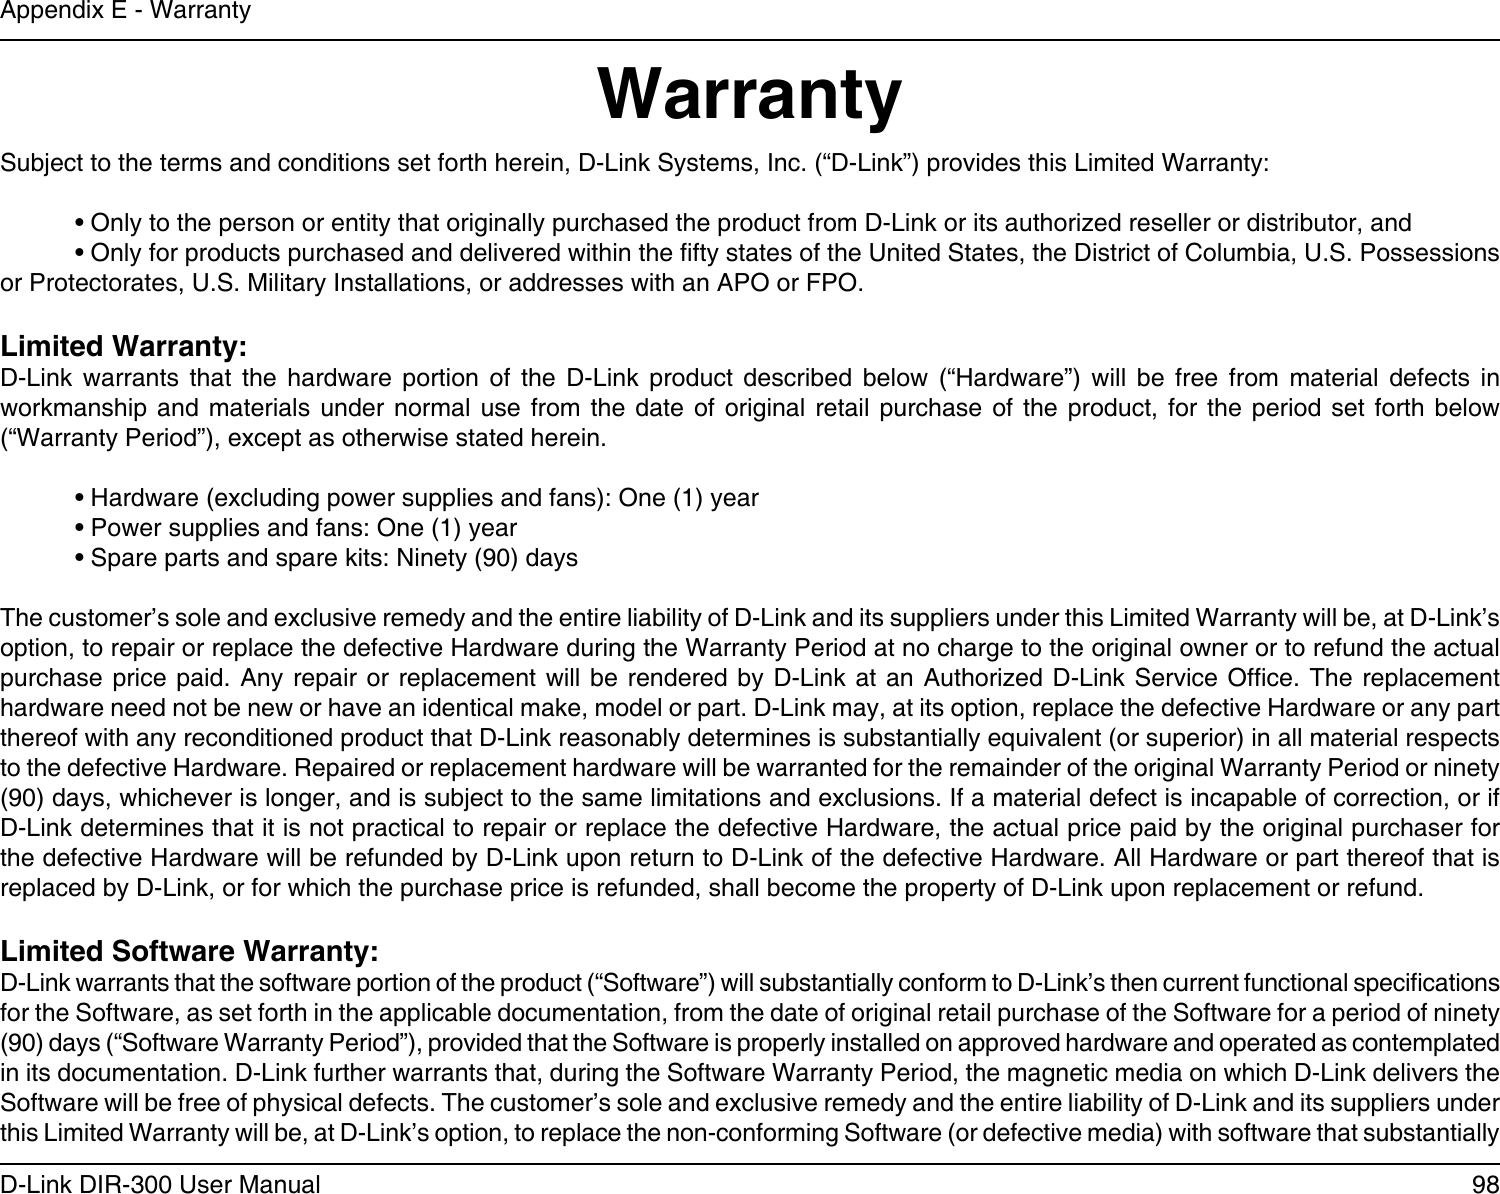 98D-Link DIR-300 User ManualAppendix E - WarrantyWarrantySubject to the terms and conditions set forth herein, D-Link Systems, Inc. (“D-Link”) provides this Limited Warranty:  • Only to the person or entity that originally purchased the product from D-Link or its authorized reseller or distributor, and  • Only for products purchased and delivered within the fty states of the United States, the District of Columbia, U.S. Possessions   or Protectorates, U.S. Military Installations, or addresses with an APO or FPO.Limited Warranty:D-Link  warrants  that  the  hardware  portion  of  the  D-Link  product  described  below  (“Hardware”)  will  be  free  from  material  defects  in workmanship  and  materials under  normal  use from  the  date of  original retail  purchase  of the  product,  for the  period  set forth  below (“Warranty Period”), except as otherwise stated herein.  • Hardware (excluding power supplies and fans): One (1) year  • Power supplies and fans: One (1) year  • Spare parts and spare kits: Ninety (90) daysThe customer’s sole and exclusive remedy and the entire liability of D-Link and its suppliers under this Limited Warranty will be, at D-Link’s option, to repair or replace the defective Hardware during the Warranty Period at no charge to the original owner or to refund the actual purchase price paid. Any repair or replacement will be  rendered  by  D-Link  at  an  Authorized  D-Link  Service Ofce. The replacement hardware need not be new or have an identical make, model or part. D-Link may, at its option, replace the defective Hardware or any part thereof with any reconditioned product that D-Link reasonably determines is substantially equivalent (or superior) in all material respects to the defective Hardware. Repaired or replacement hardware will be warranted for the remainder of the original Warranty Period or ninety (90) days, whichever is longer, and is subject to the same limitations and exclusions. If a material defect is incapable of correction, or if D-Link determines that it is not practical to repair or replace the defective Hardware, the actual price paid by the original purchaser for the defective Hardware will be refunded by D-Link upon return to D-Link of the defective Hardware. All Hardware or part thereof that is replaced by D-Link, or for which the purchase price is refunded, shall become the property of D-Link upon replacement or refund.Limited Software Warranty:D-Link warrants that the software portion of the product (“Software”) will substantially conform to D-Link’s then current functional specications for the Software, as set forth in the applicable documentation, from the date of original retail purchase of the Software for a period of ninety (90) days (“Software Warranty Period”), provided that the Software is properly installed on approved hardware and operated as contemplated in its documentation. D-Link further warrants that, during the Software Warranty Period, the magnetic media on which D-Link delivers the Software will be free of physical defects. The customer’s sole and exclusive remedy and the entire liability of D-Link and its suppliers under this Limited Warranty will be, at D-Link’s option, to replace the non-conforming Software (or defective media) with software that substantially 